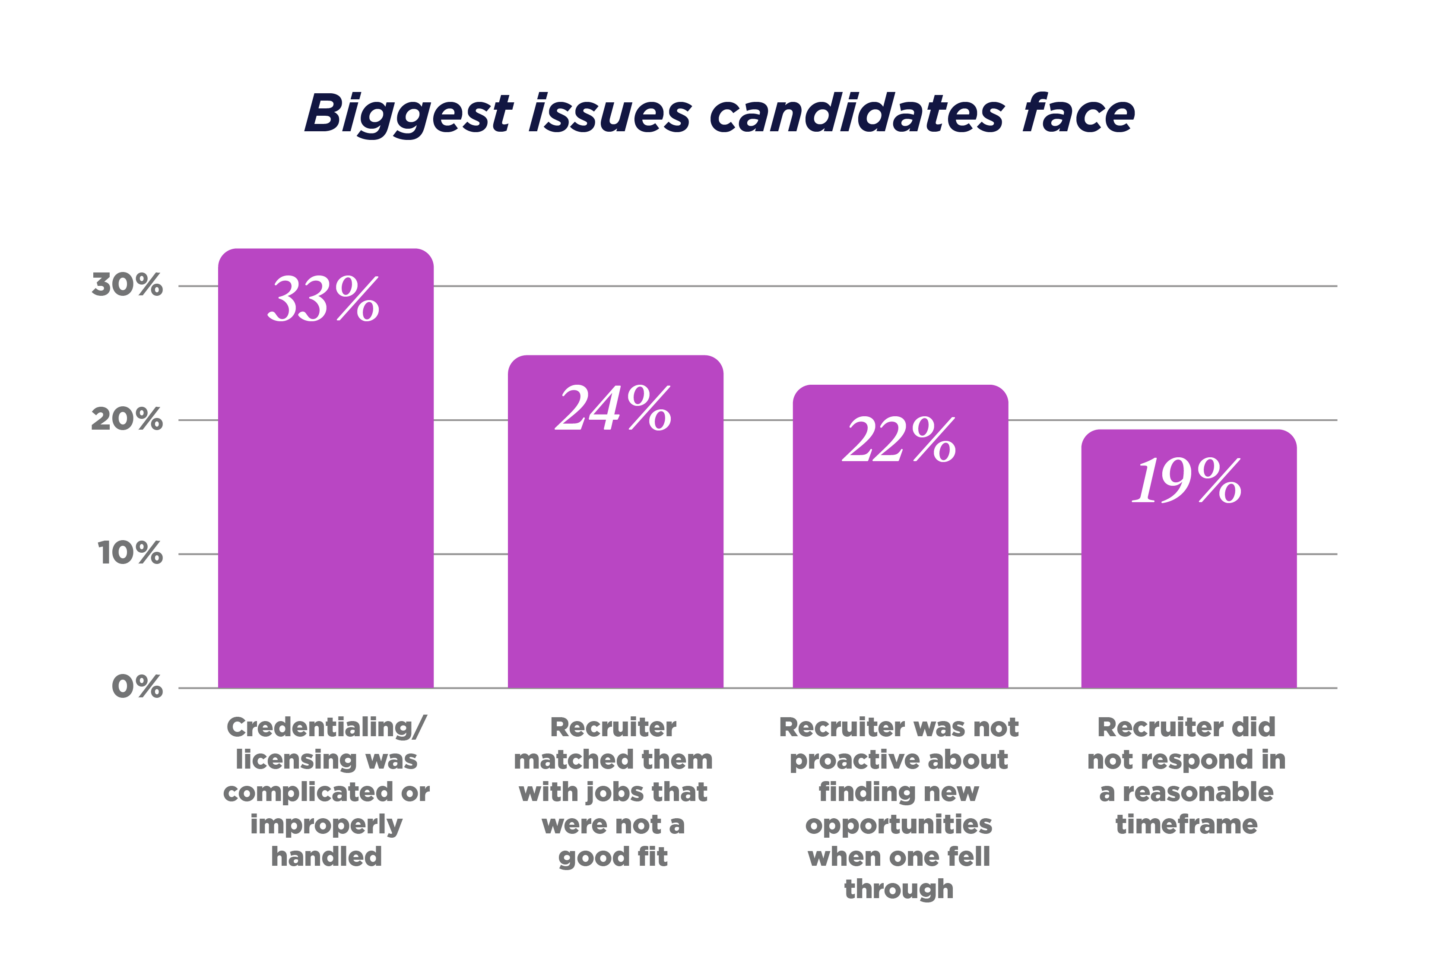 GRID_Talent Trends Report_2023_UKI Graphs_Biggest issues candidates face_V1